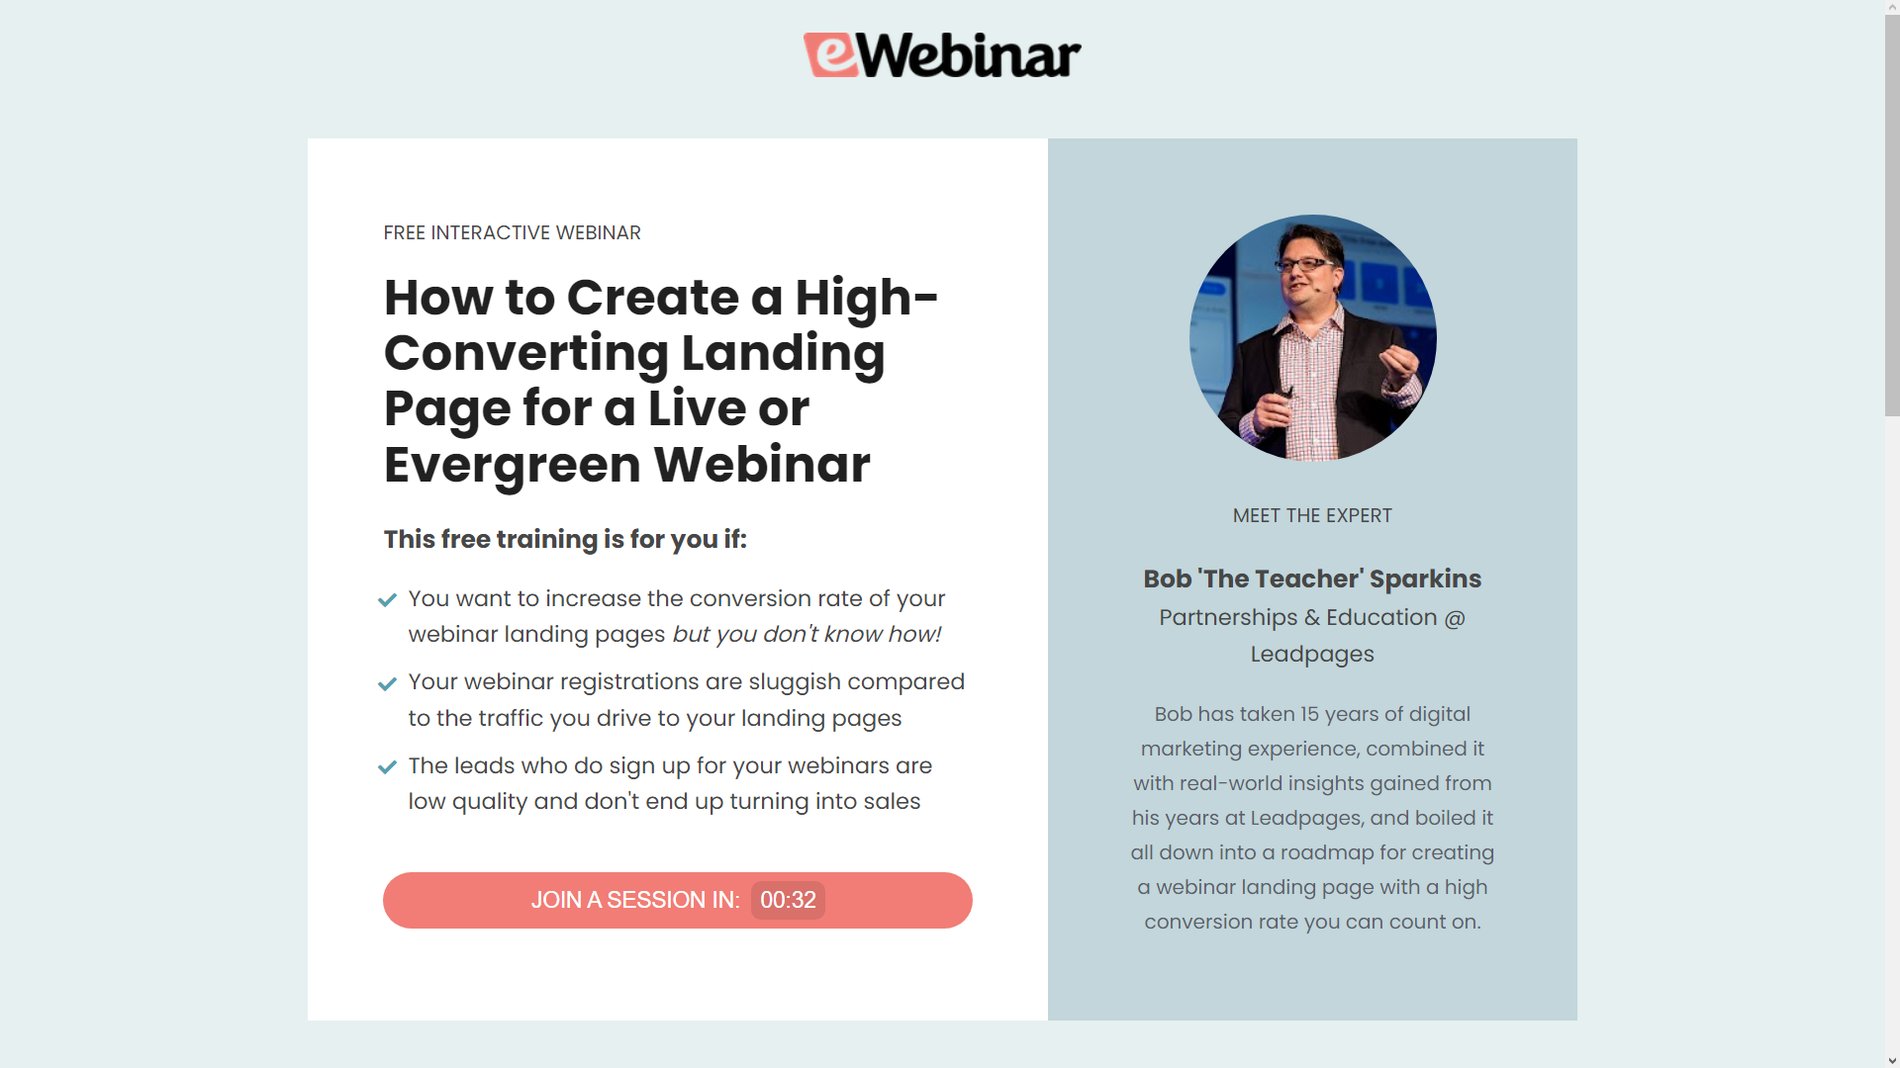 Webinar Planning: A Step-by-Step Guide